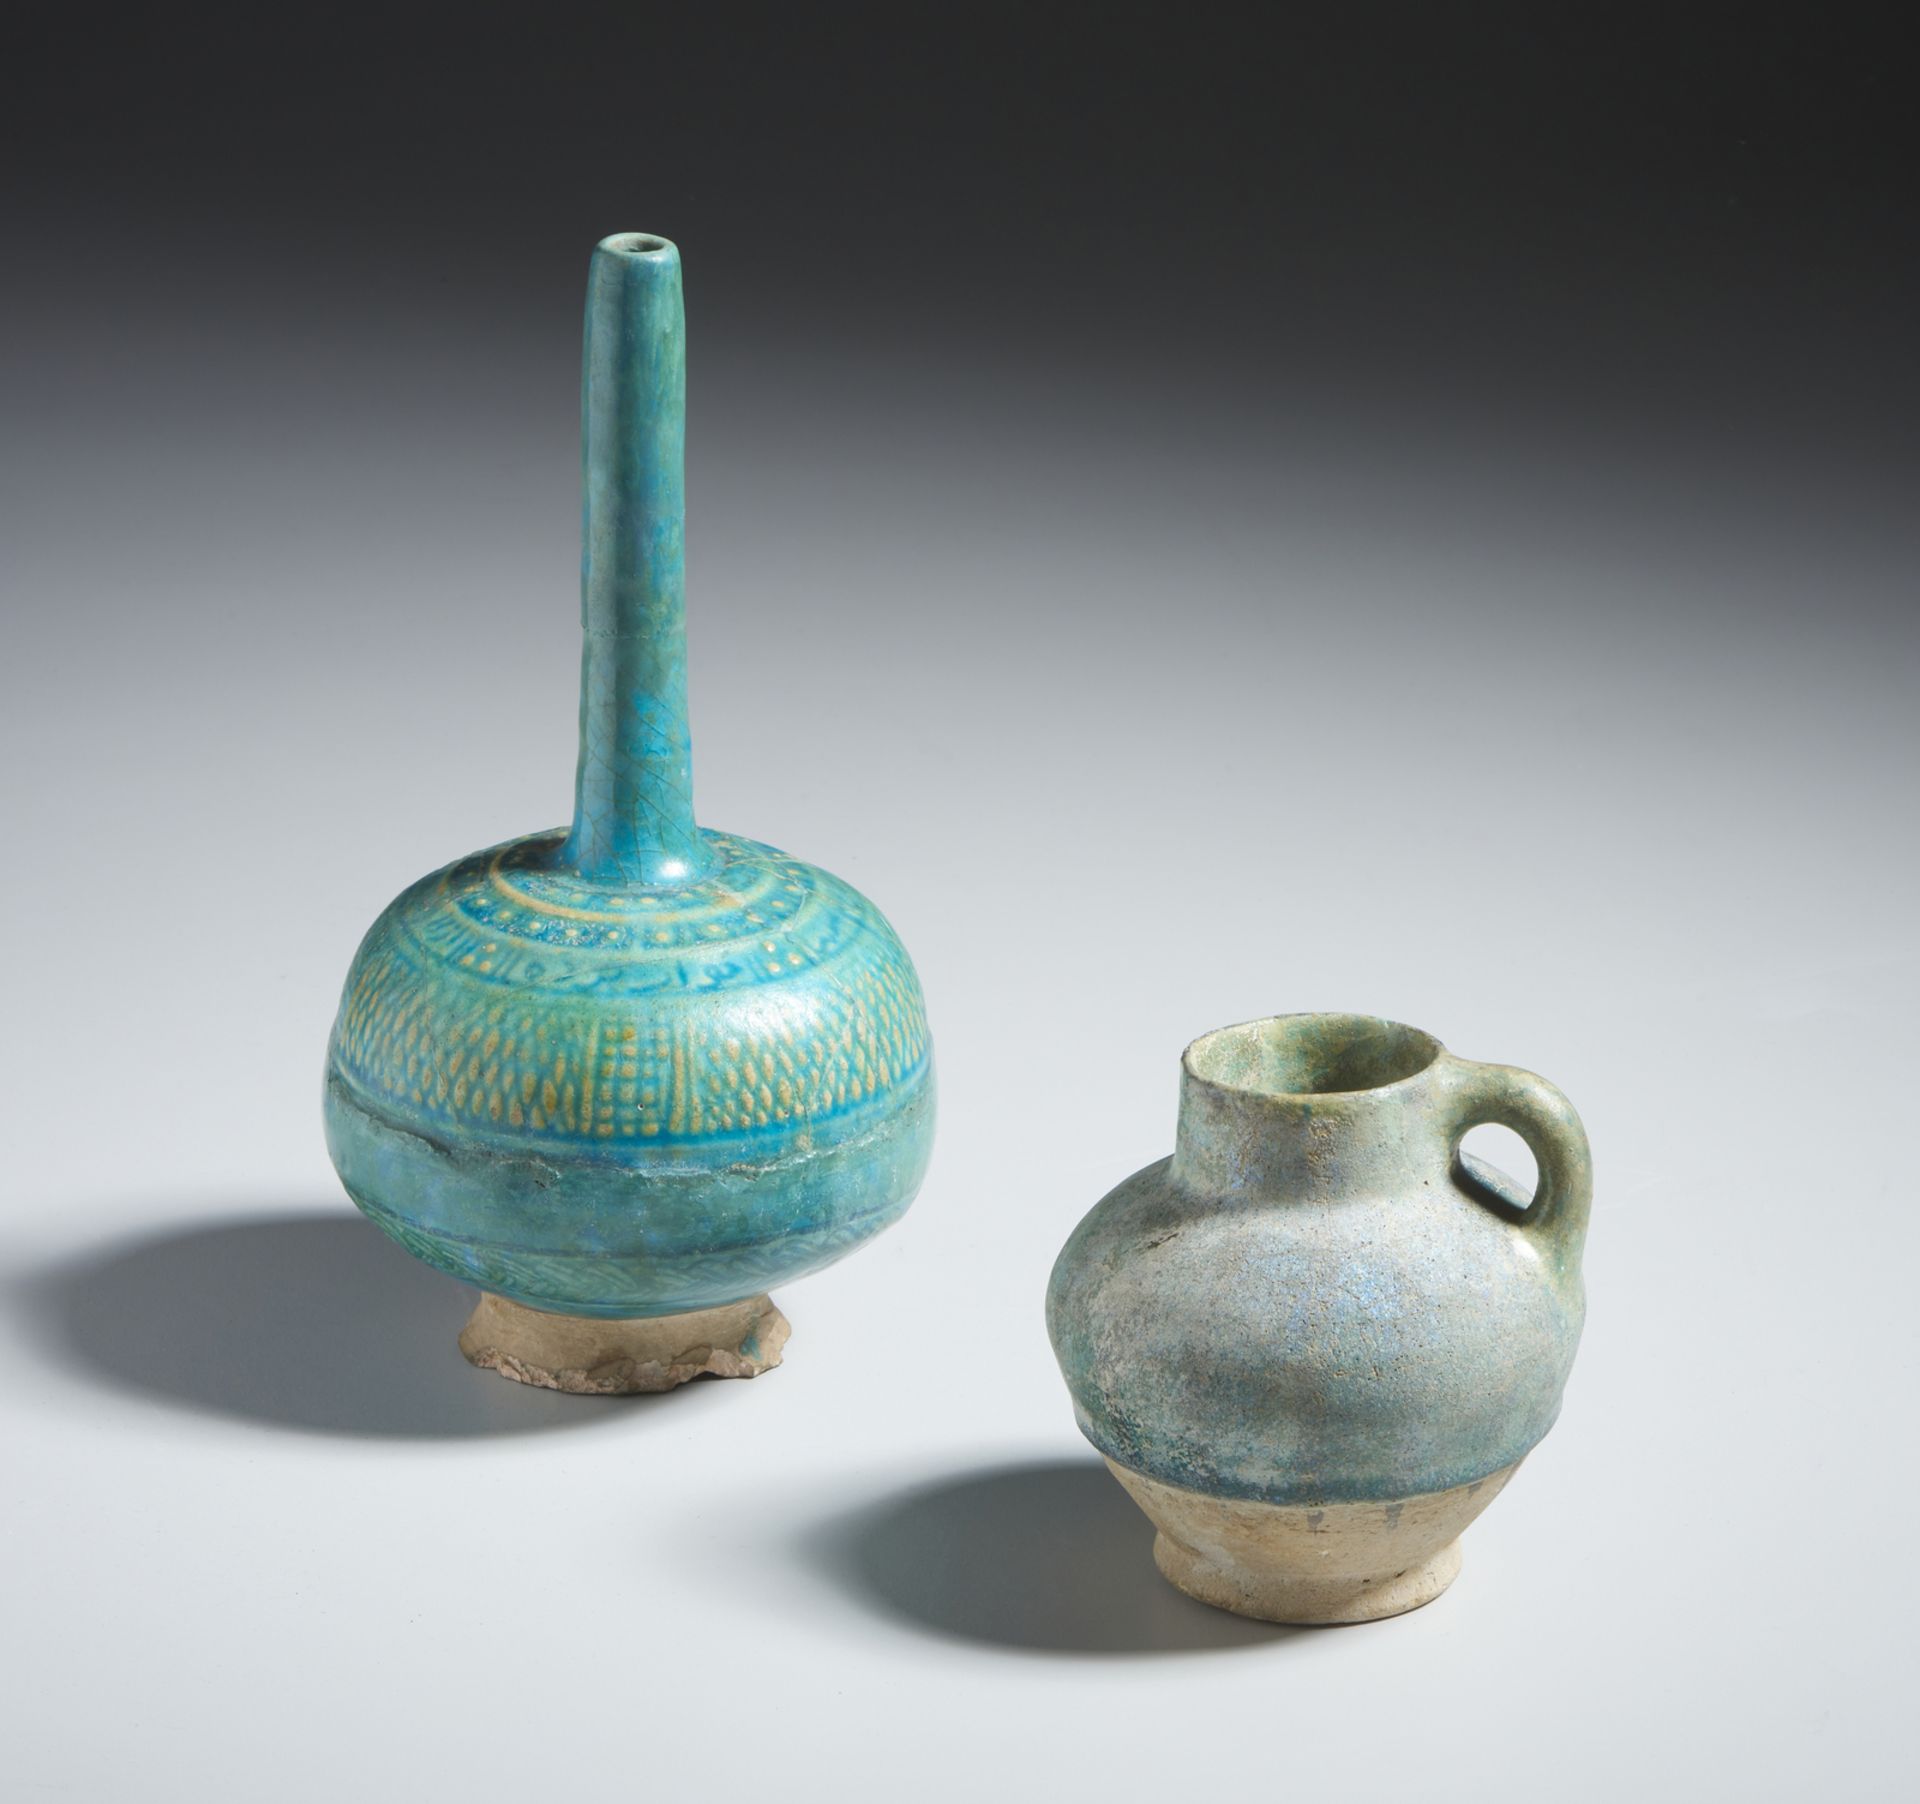 Two turquoise glazed pottery vessels Eastern Iran or nowadays Afghanistan, 12th-13th century